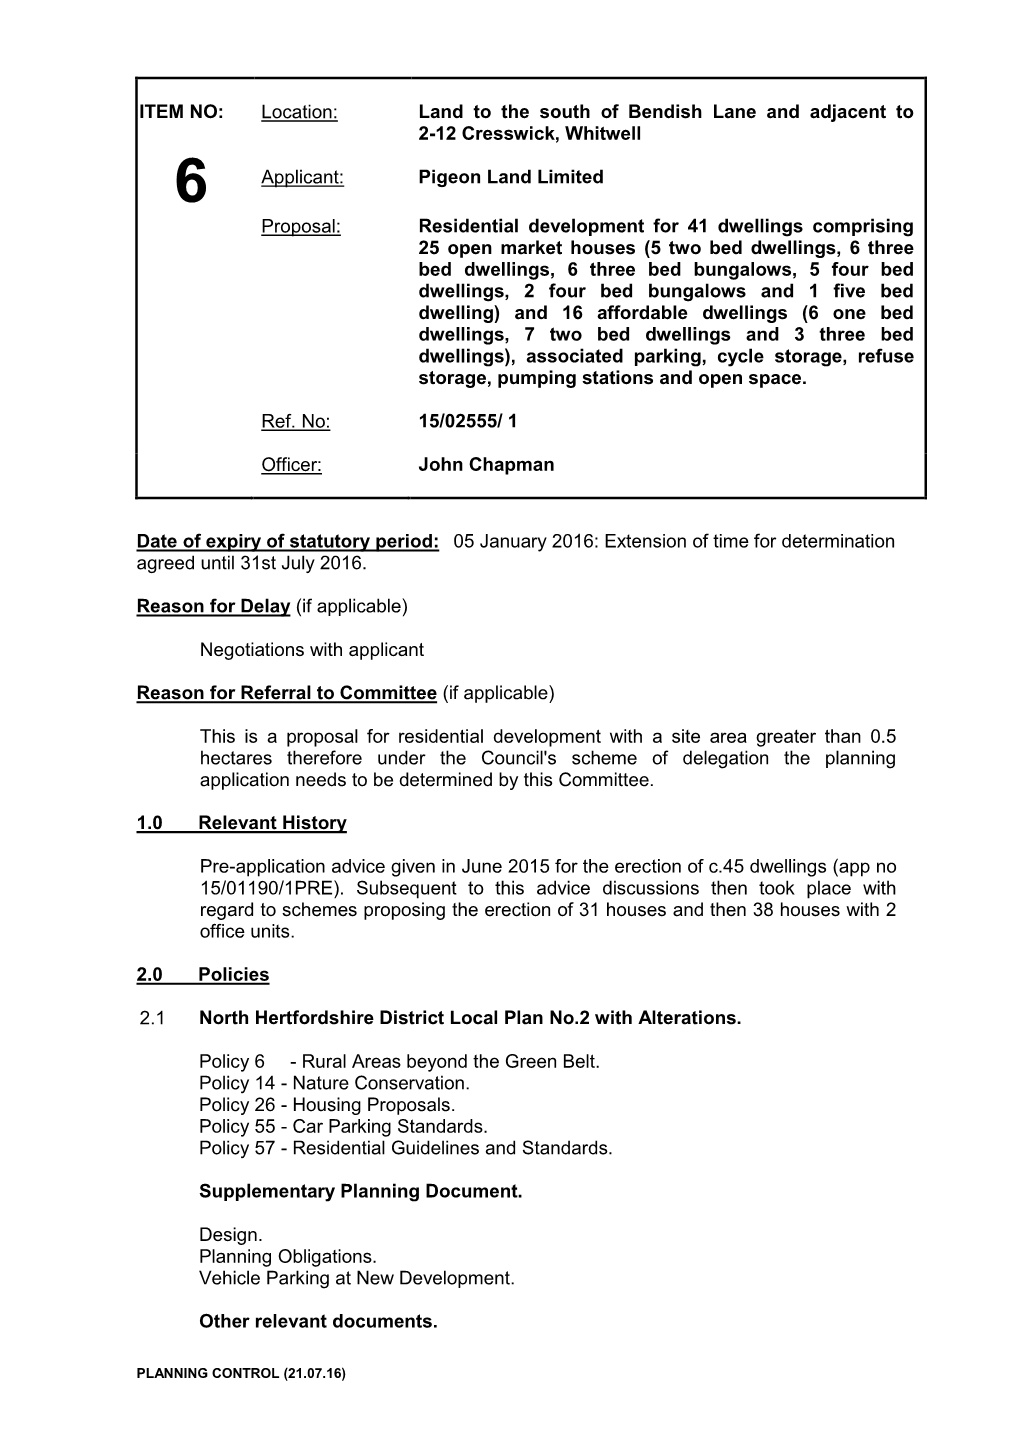 ITEM NO: Location: Land to the South of Bendish Lane and Adjacent to 2-12 Cresswick, Whitwell 6 Applicant: Pigeon Land Limited